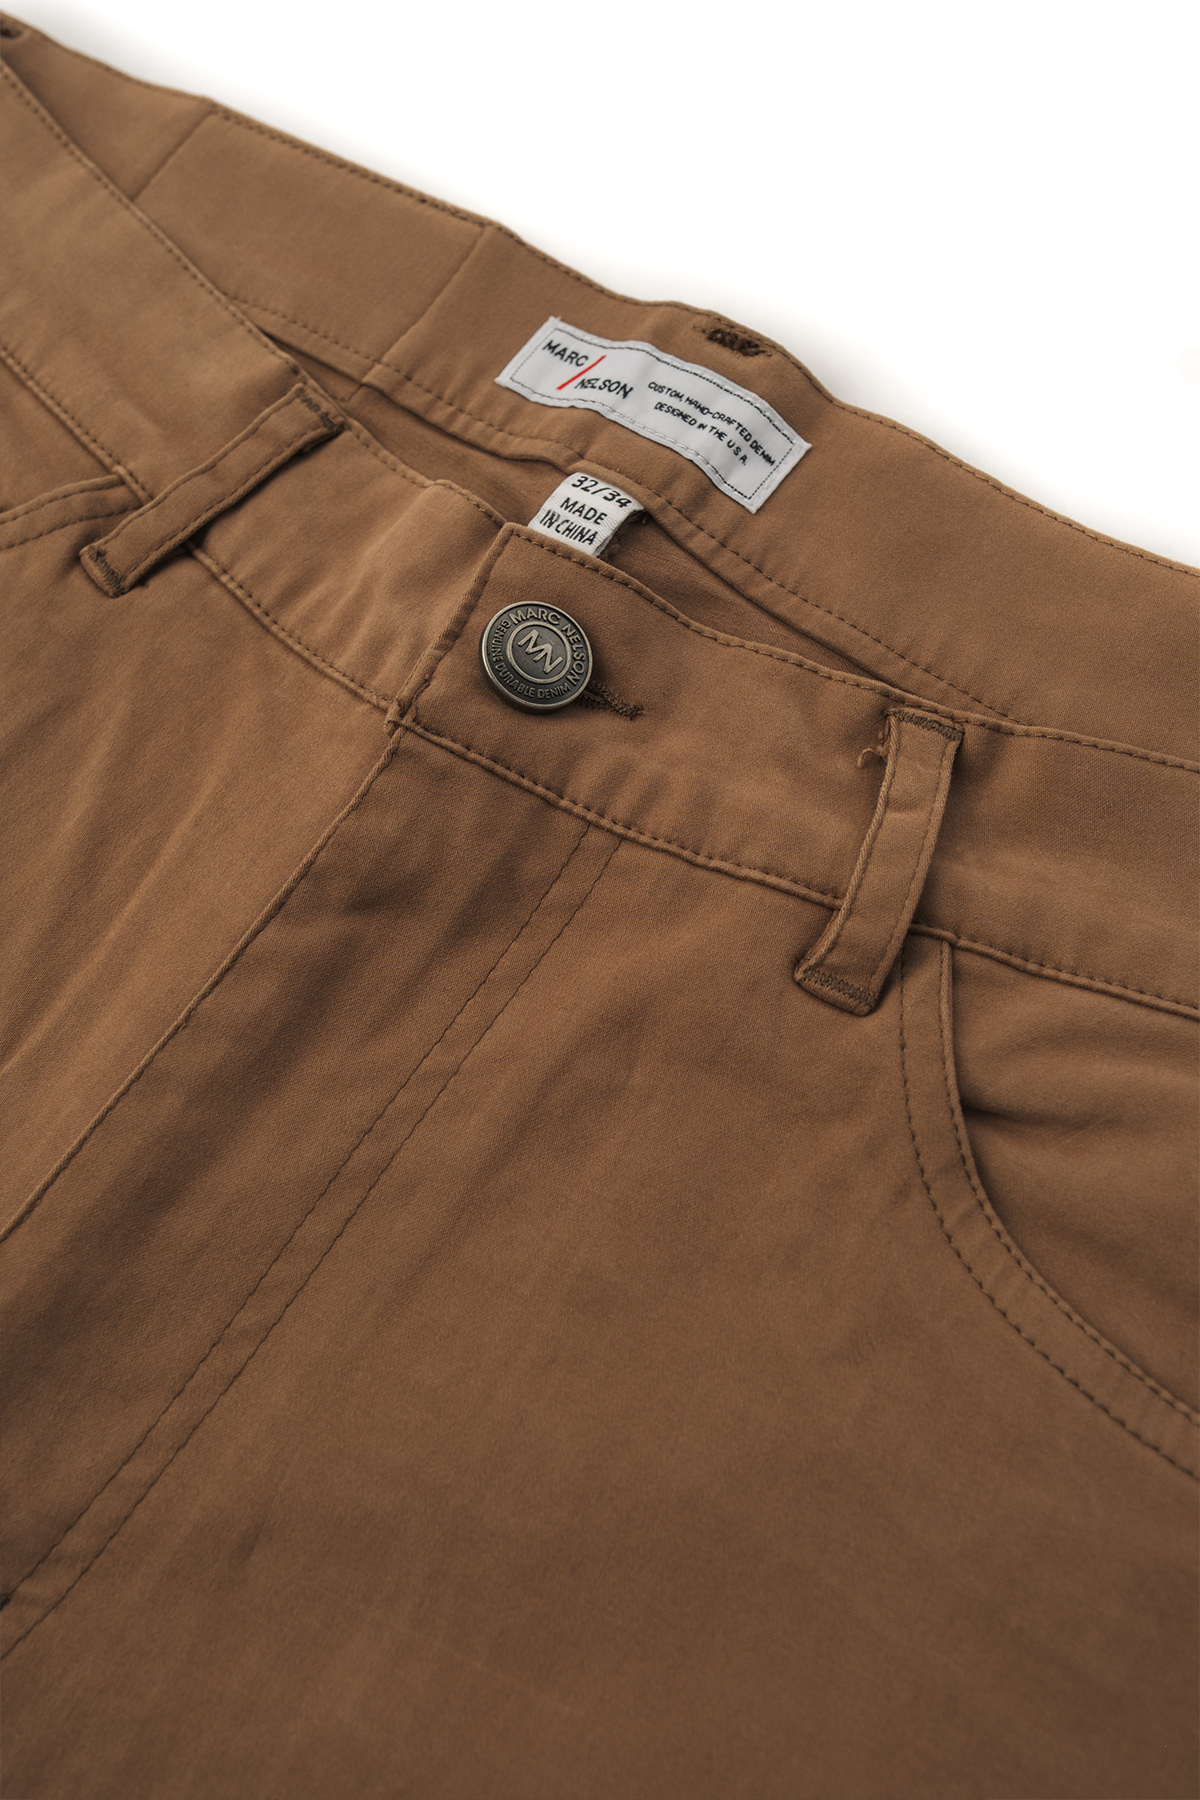 Close up photos showing the details on the front side of our george buck pants.